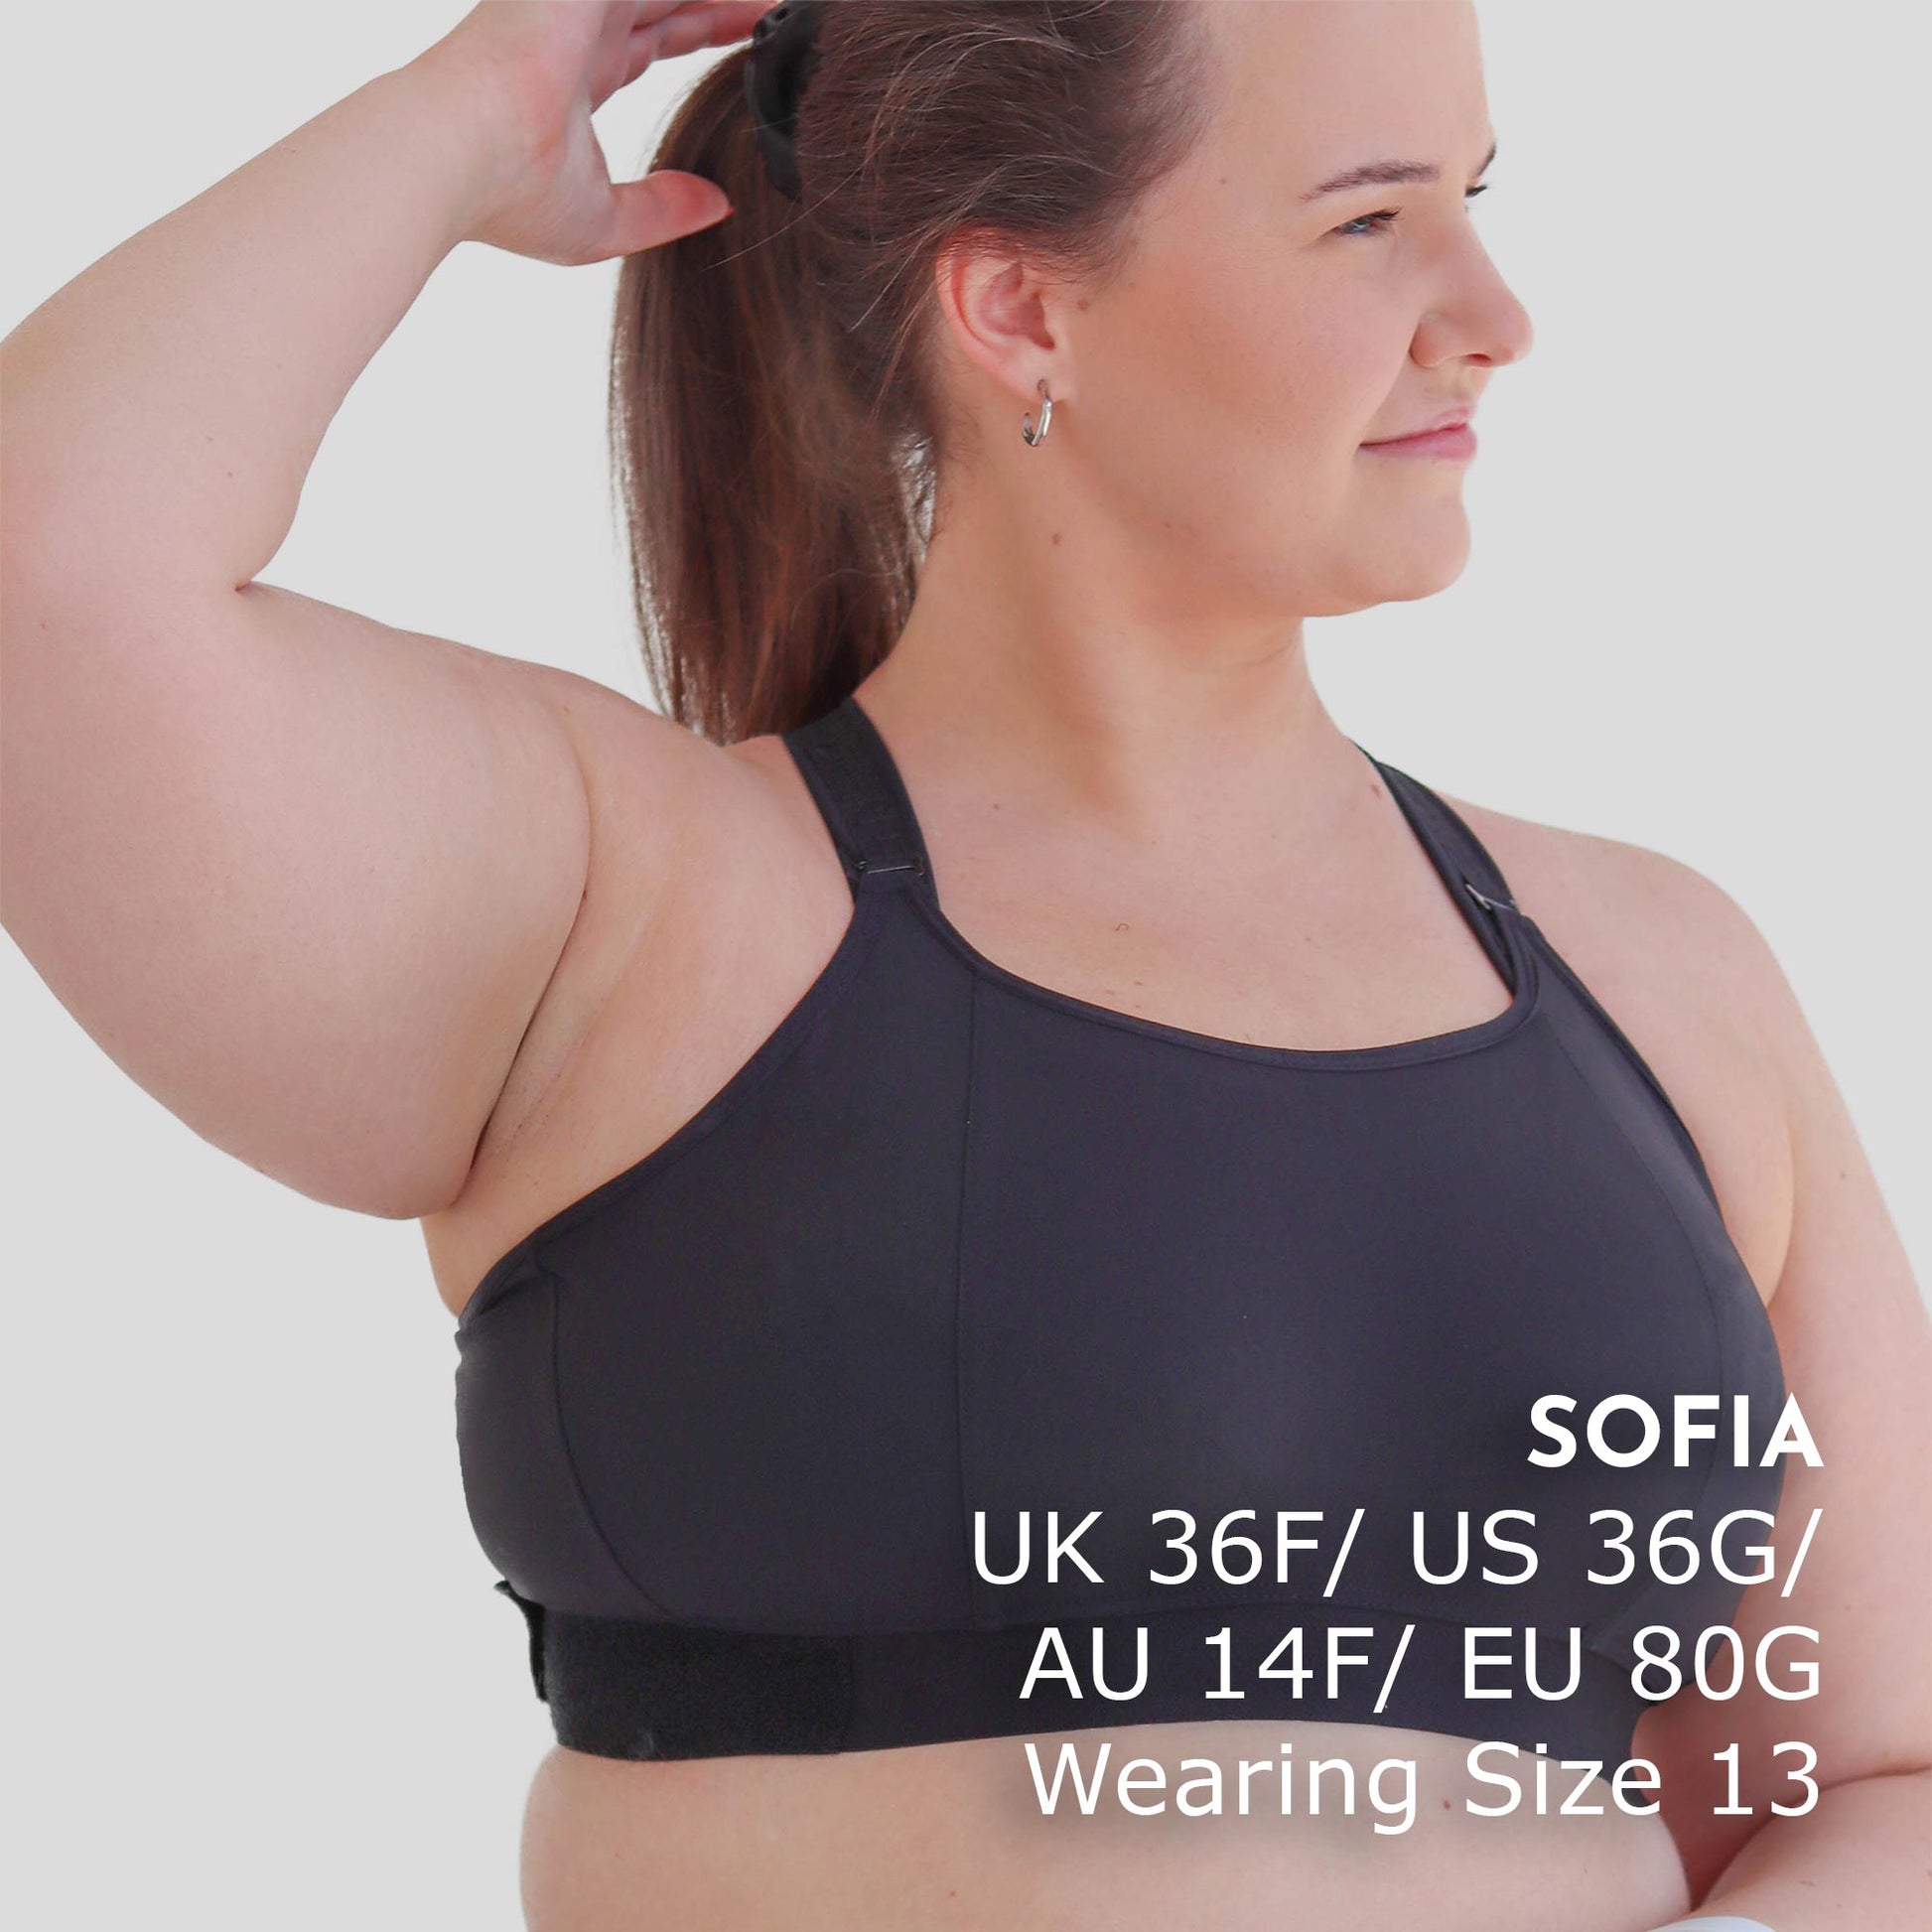 G Cup Bras: Understanding G Cup Boobs, Equivalent Cup Sizes in US/UK -  HauteFlair